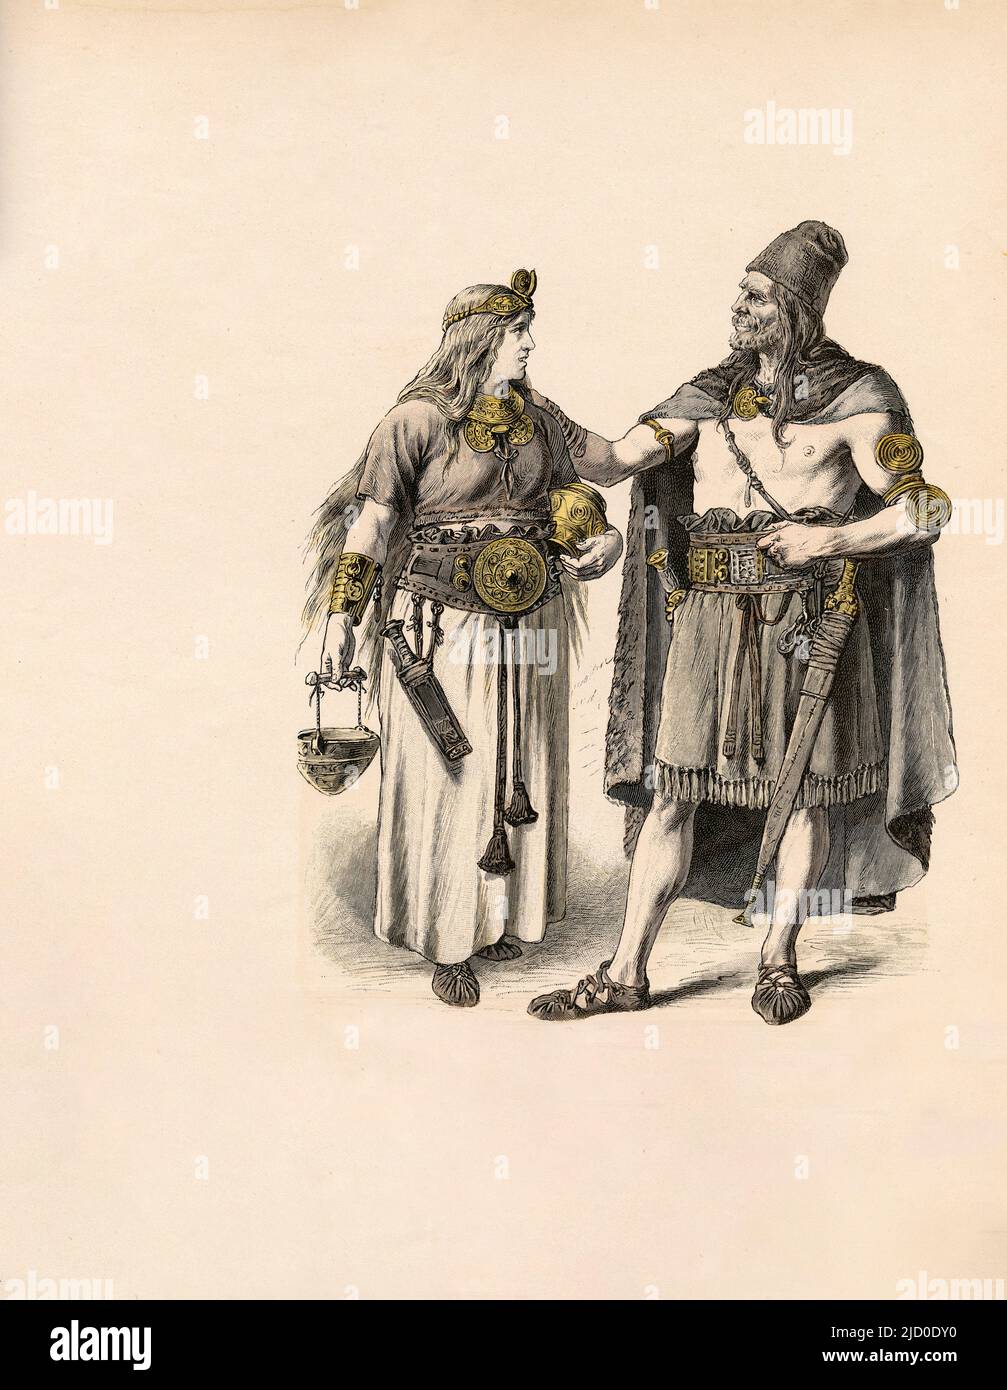 Ancient Germans, The Teutonic Tribes, The Bronze Age, Illustration, The History of Costume, Braun & Schneider, Munich, Germany, 1861-1880 Stock Photo